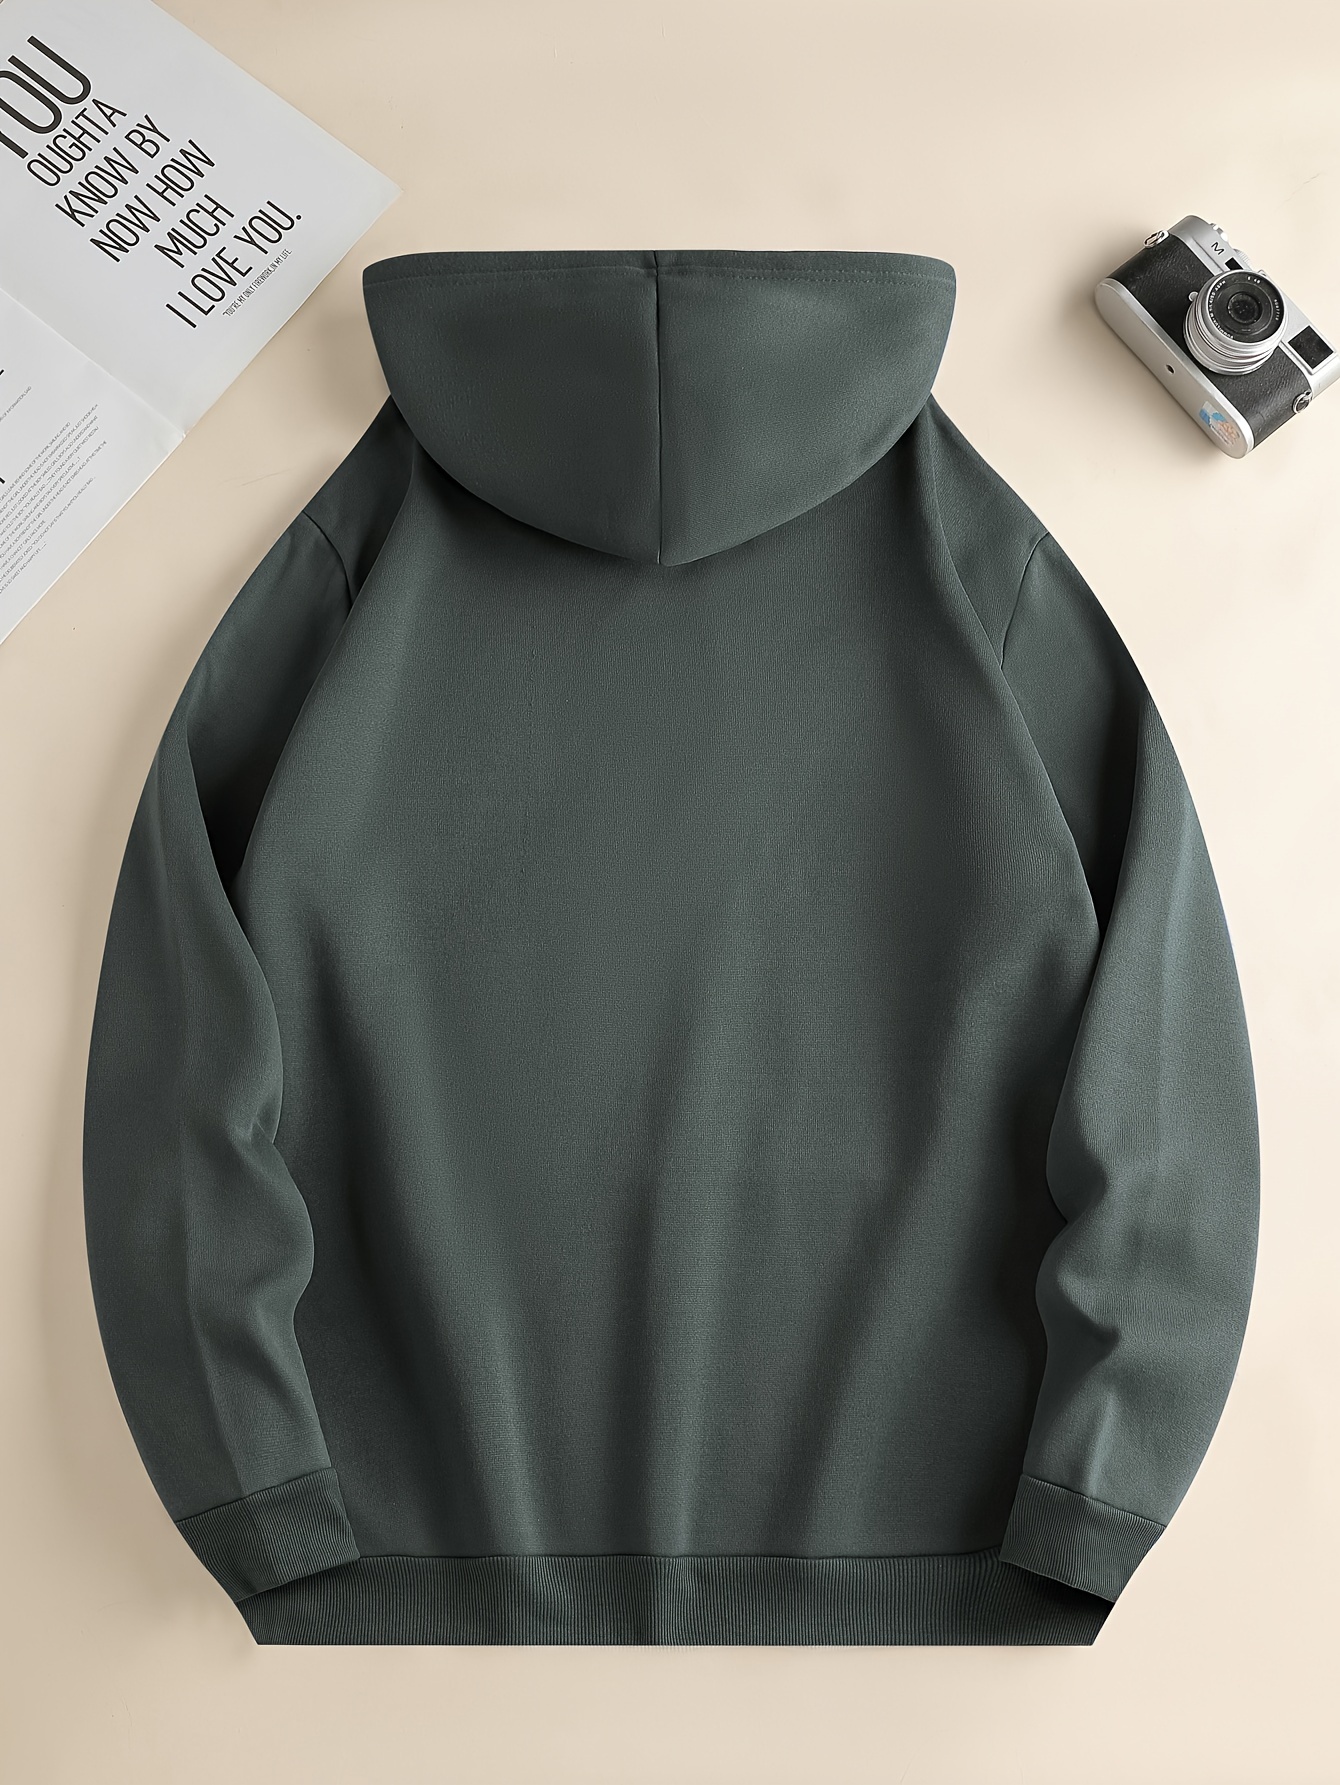 solid color hoodies for men hoodie with kangaroo pocket comfy loose trendy hooded pullover mens clothing for autumn winter details 2